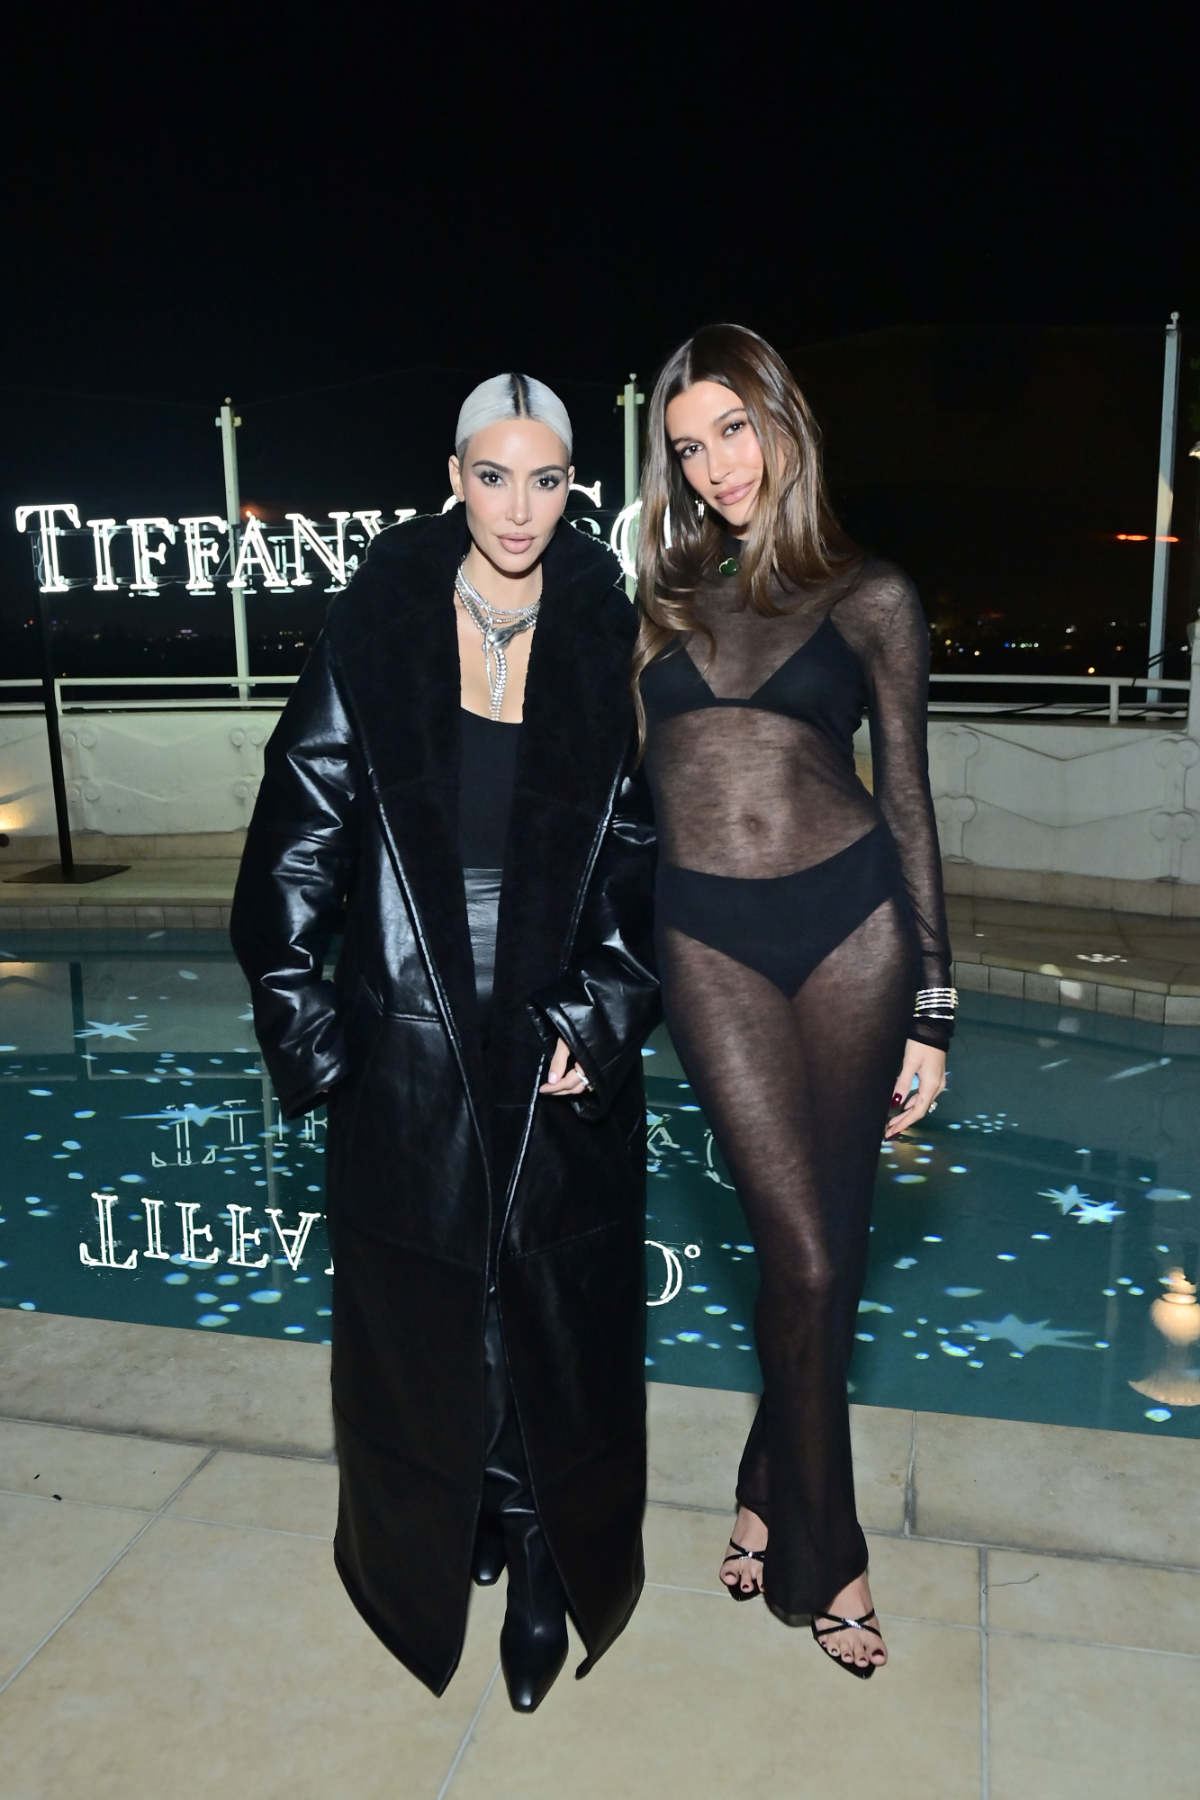 Tiffany & Co. Hosted A Vip Dinner To Celebrate The Tiffany Lock Collection